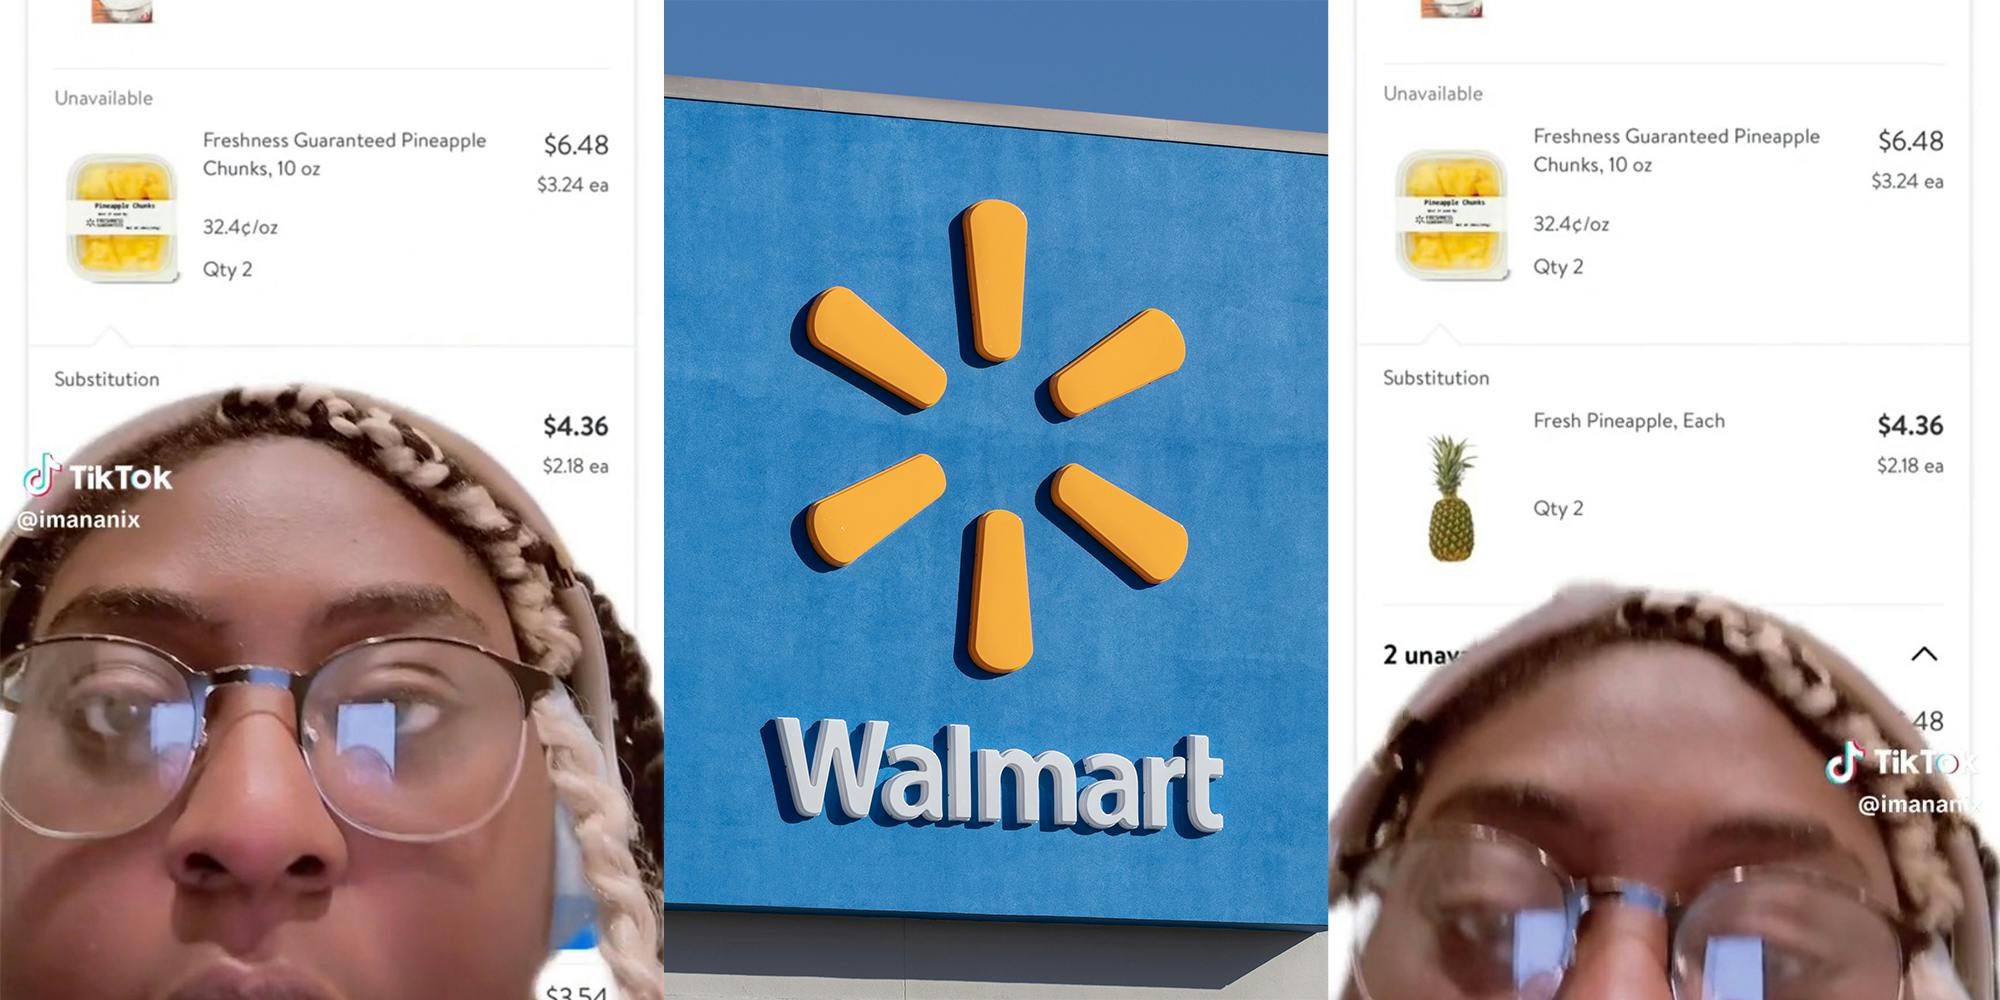 woman with greenscreen background of Walmart app